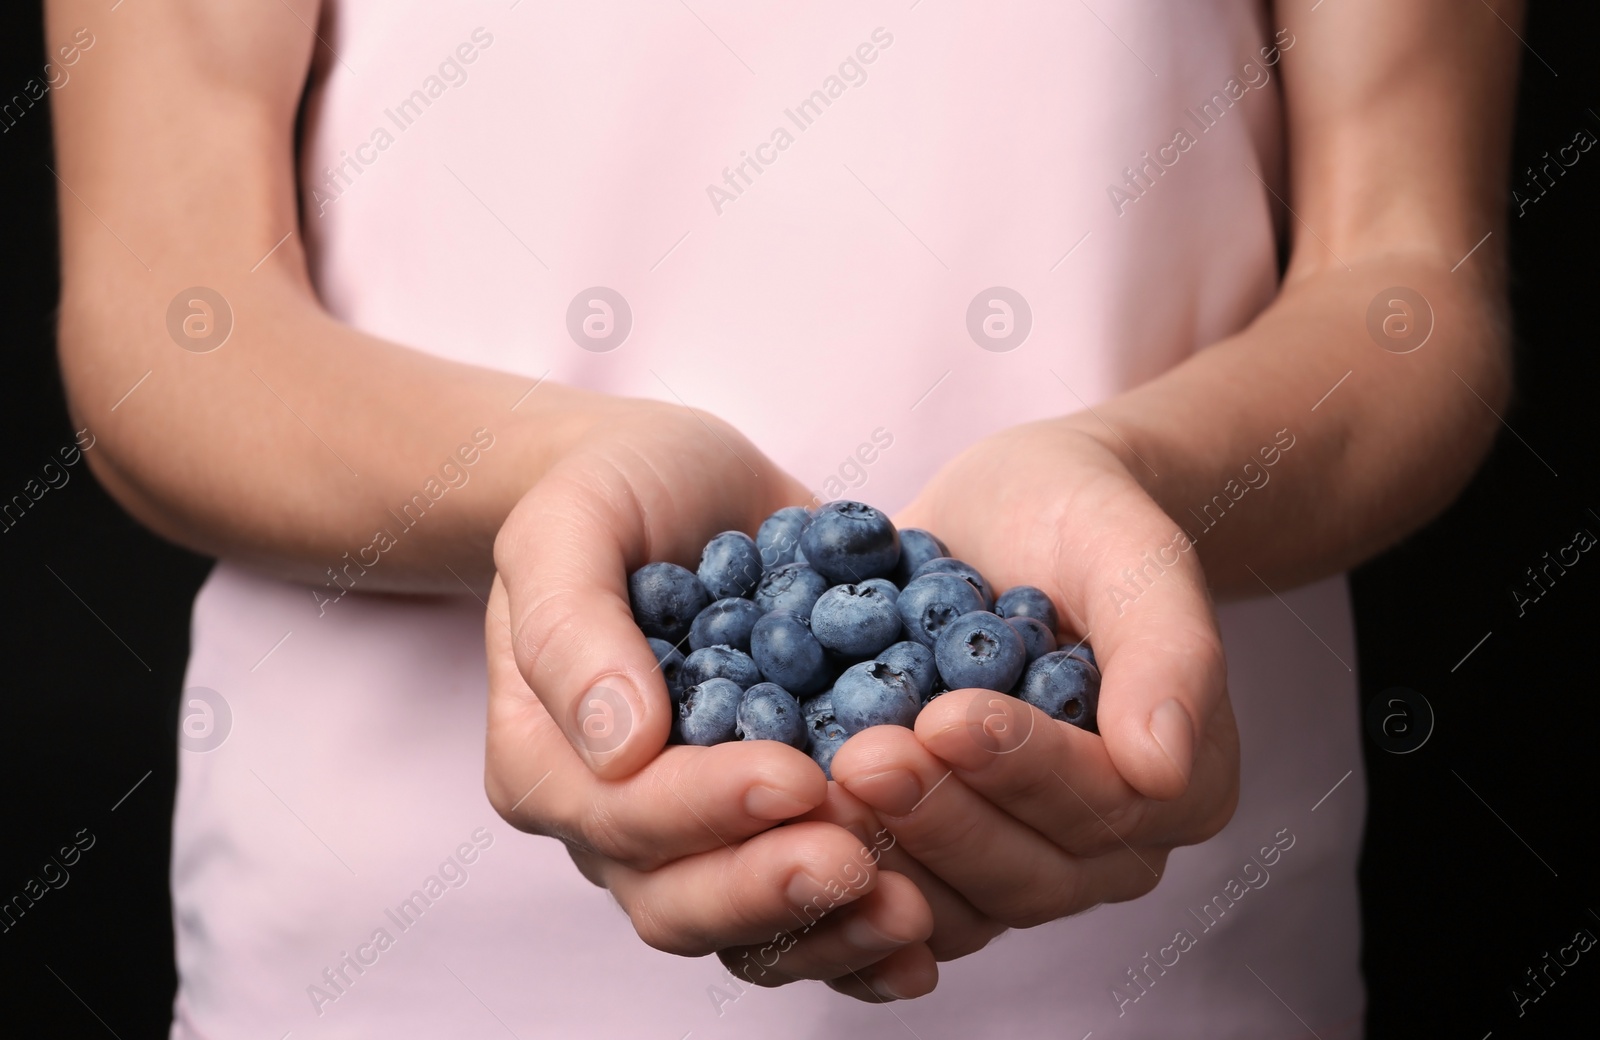 Photo of Woman holding juicy fresh blueberries, closeup view